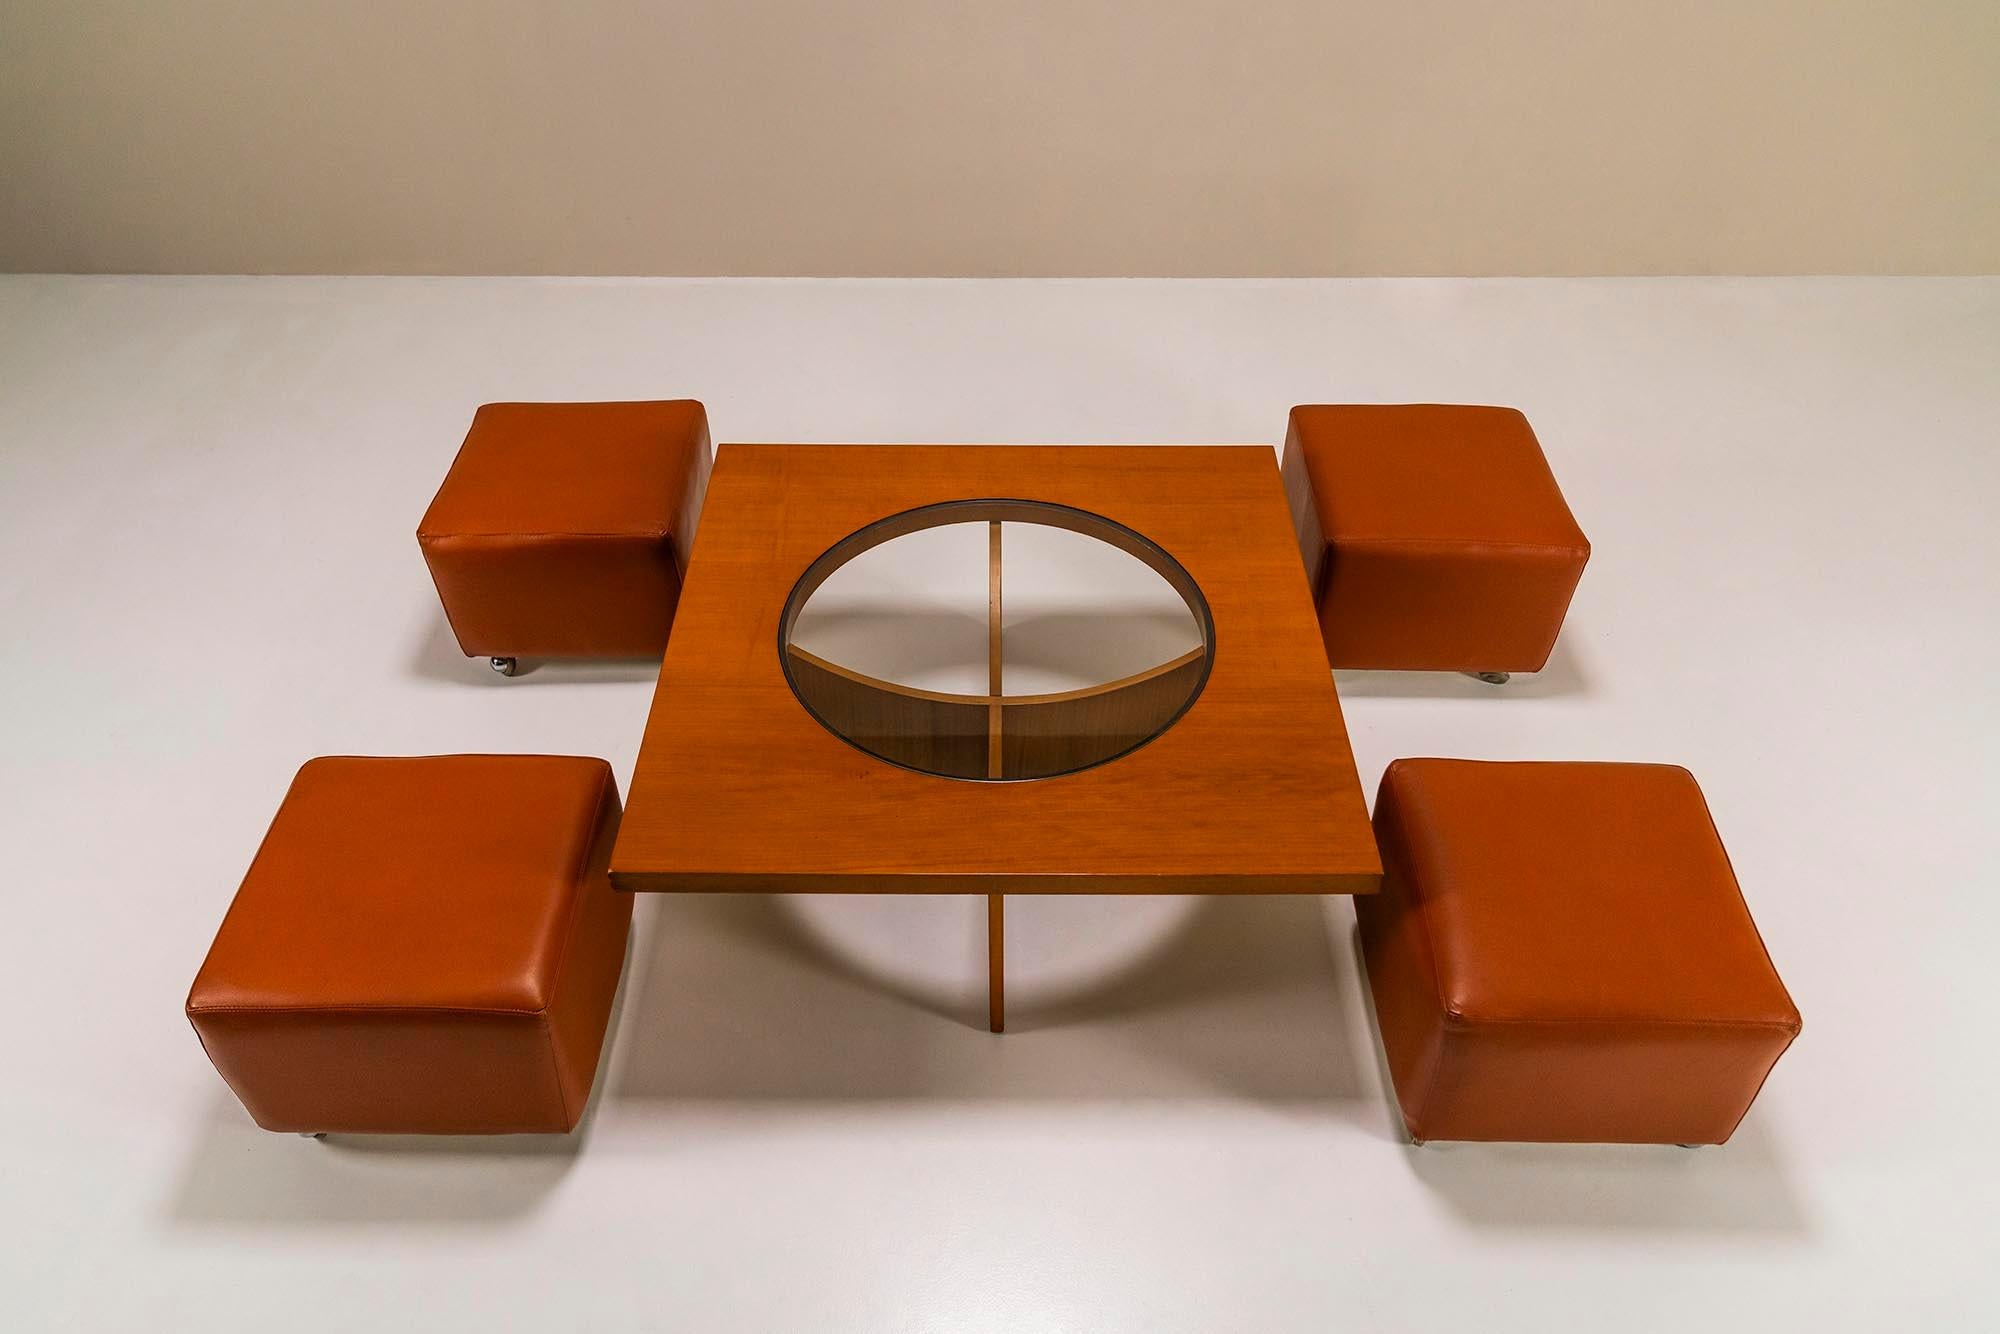 Italian Coffee Table In Cherry Wood With Four Faux Mobile Poufs, Italy 1970's For Sale